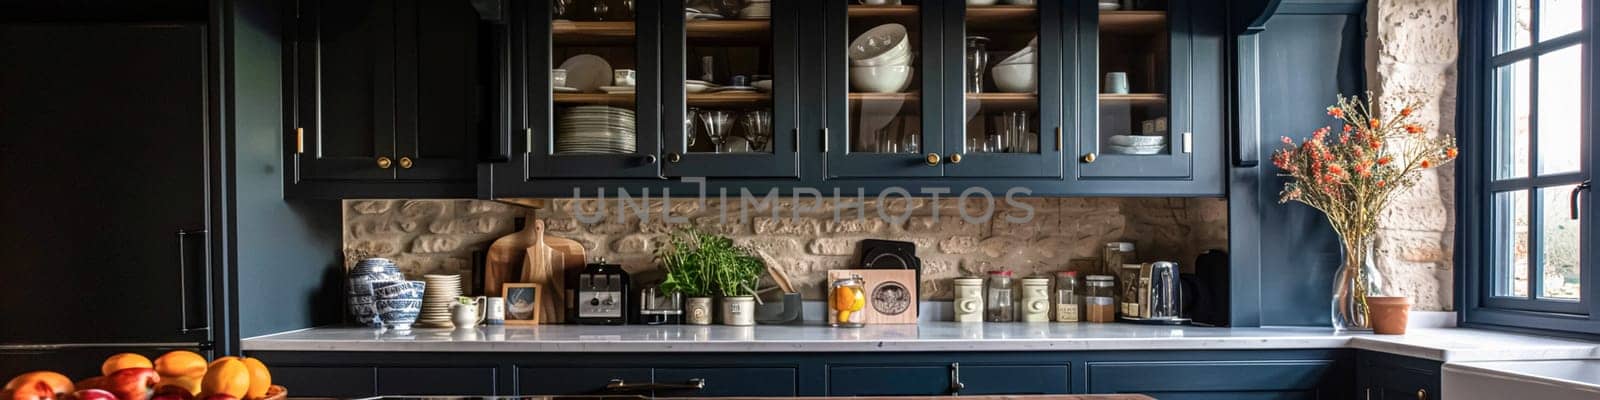 Bespoke kitchen design, country house and cottage interior design, English countryside style renovation and home decor idea banner